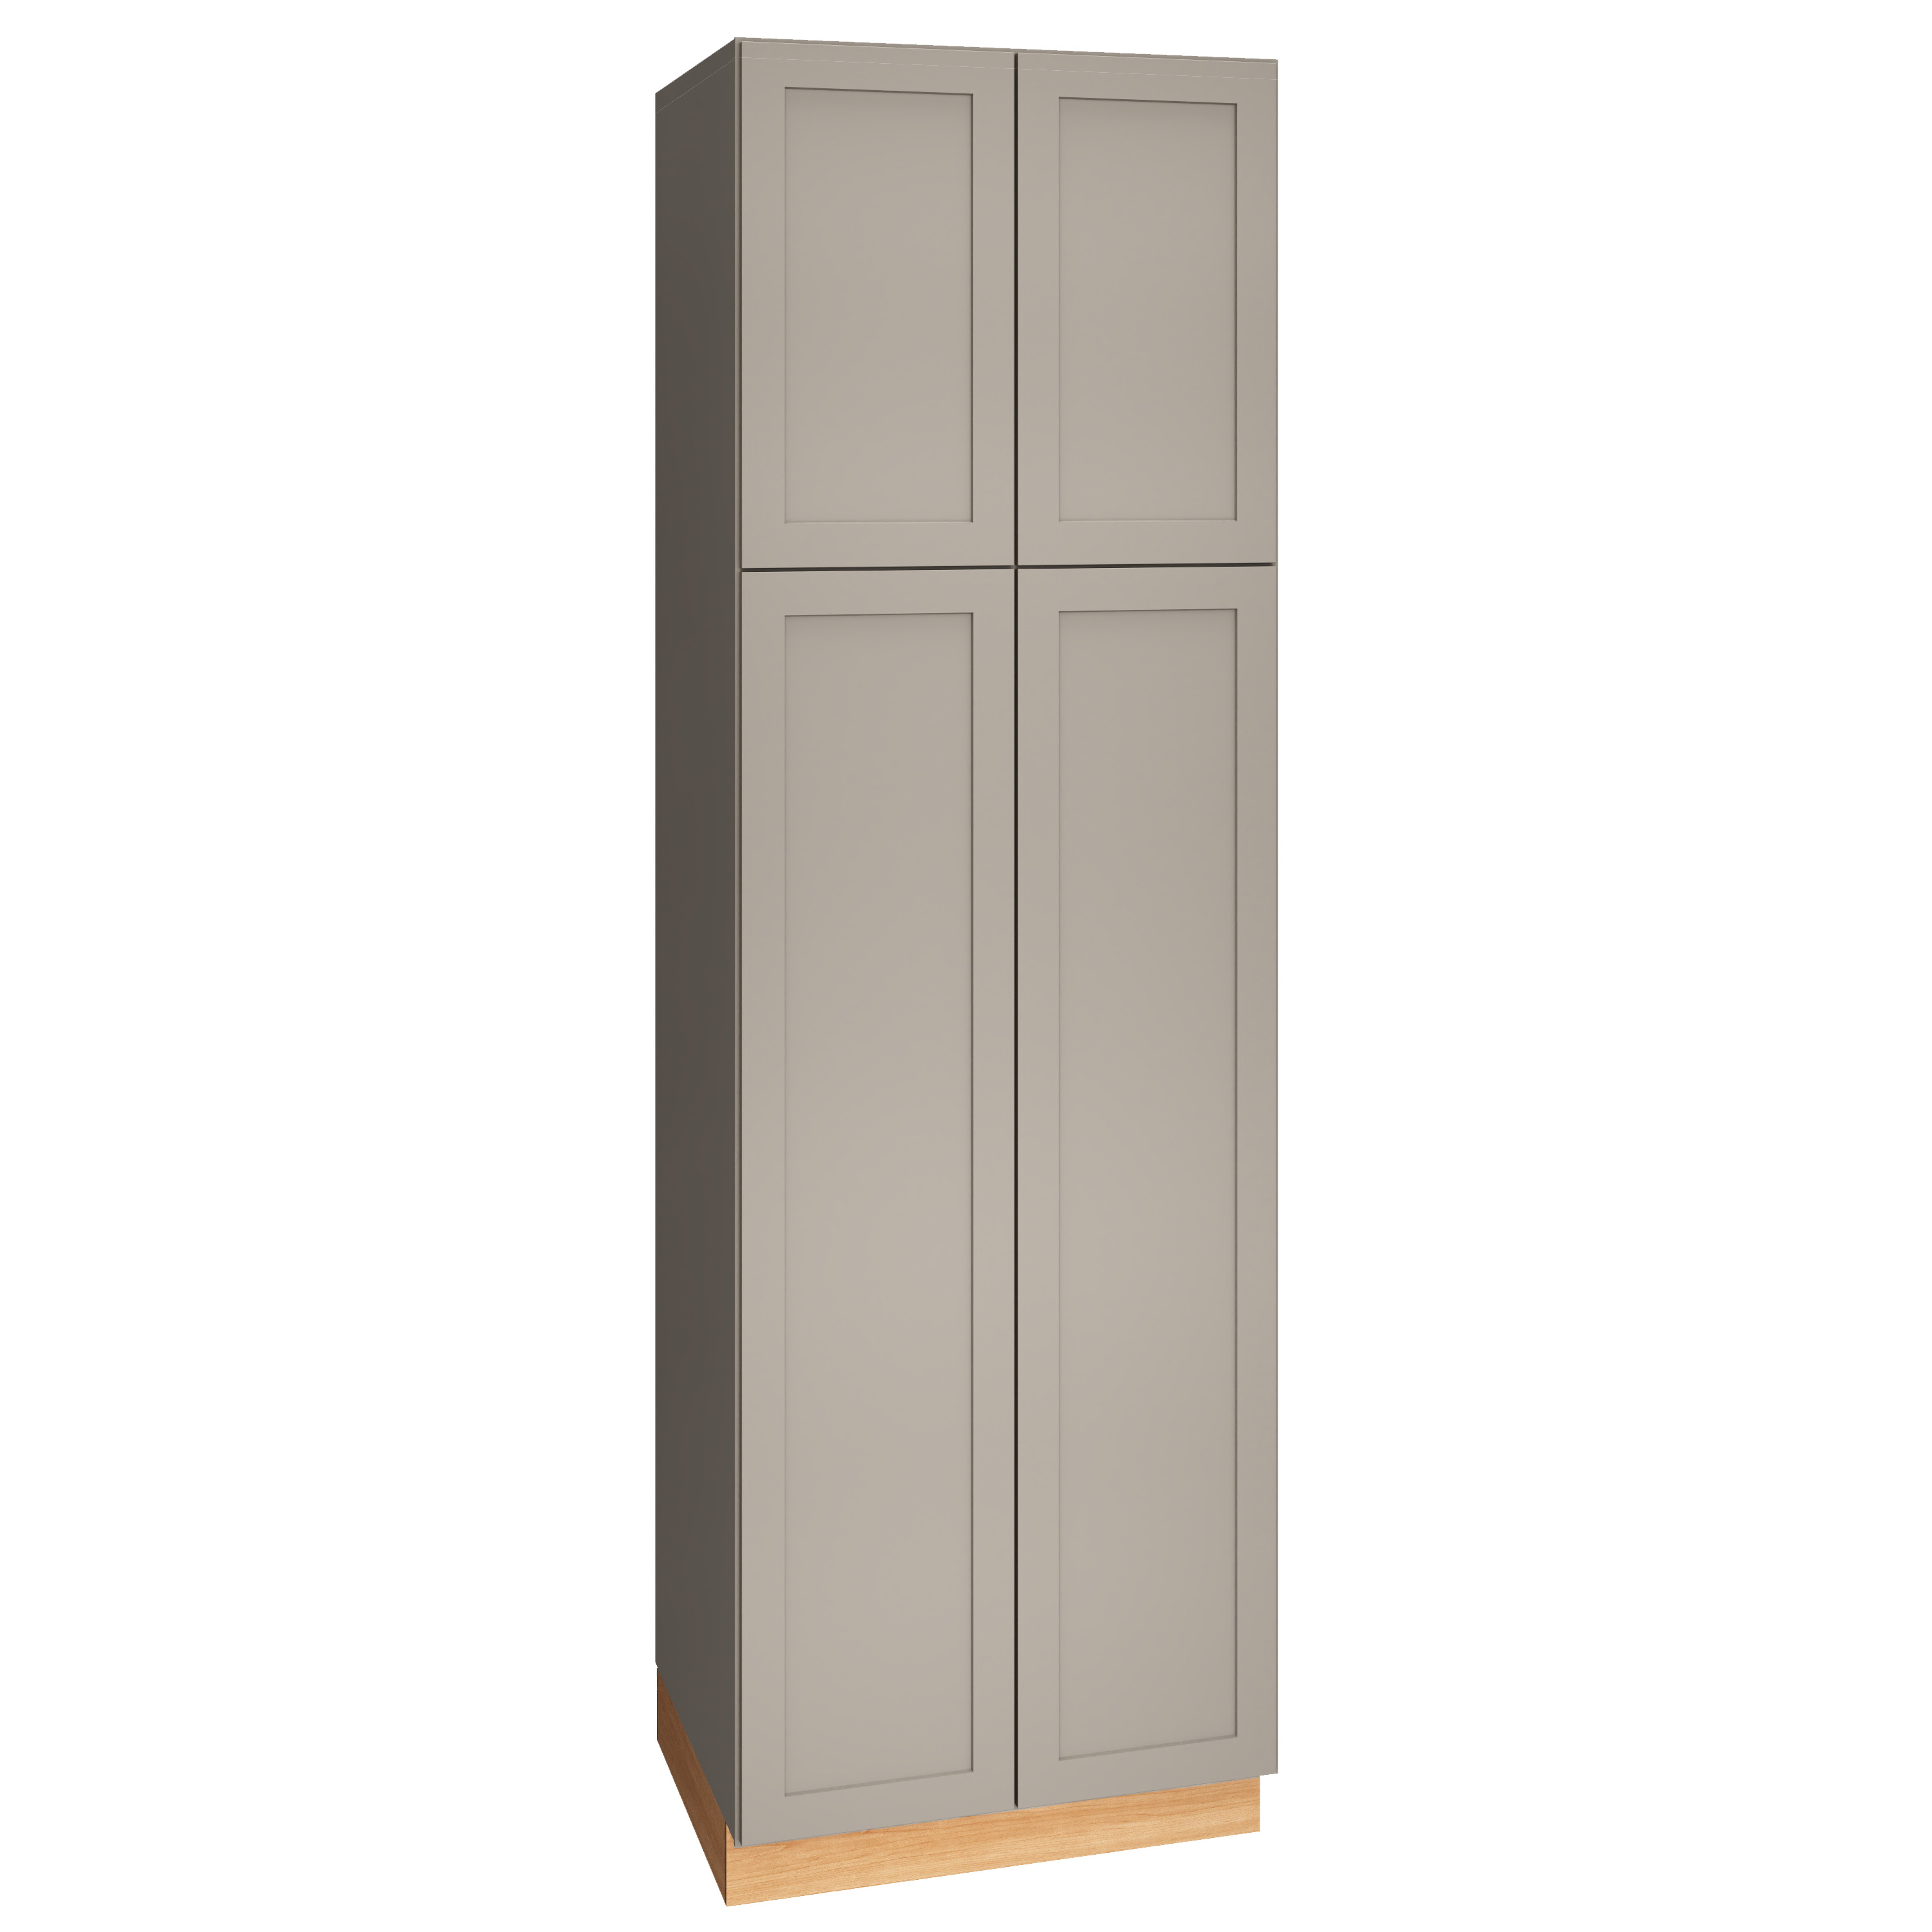 Utility Cabinet Width With Double Doors in Mineral